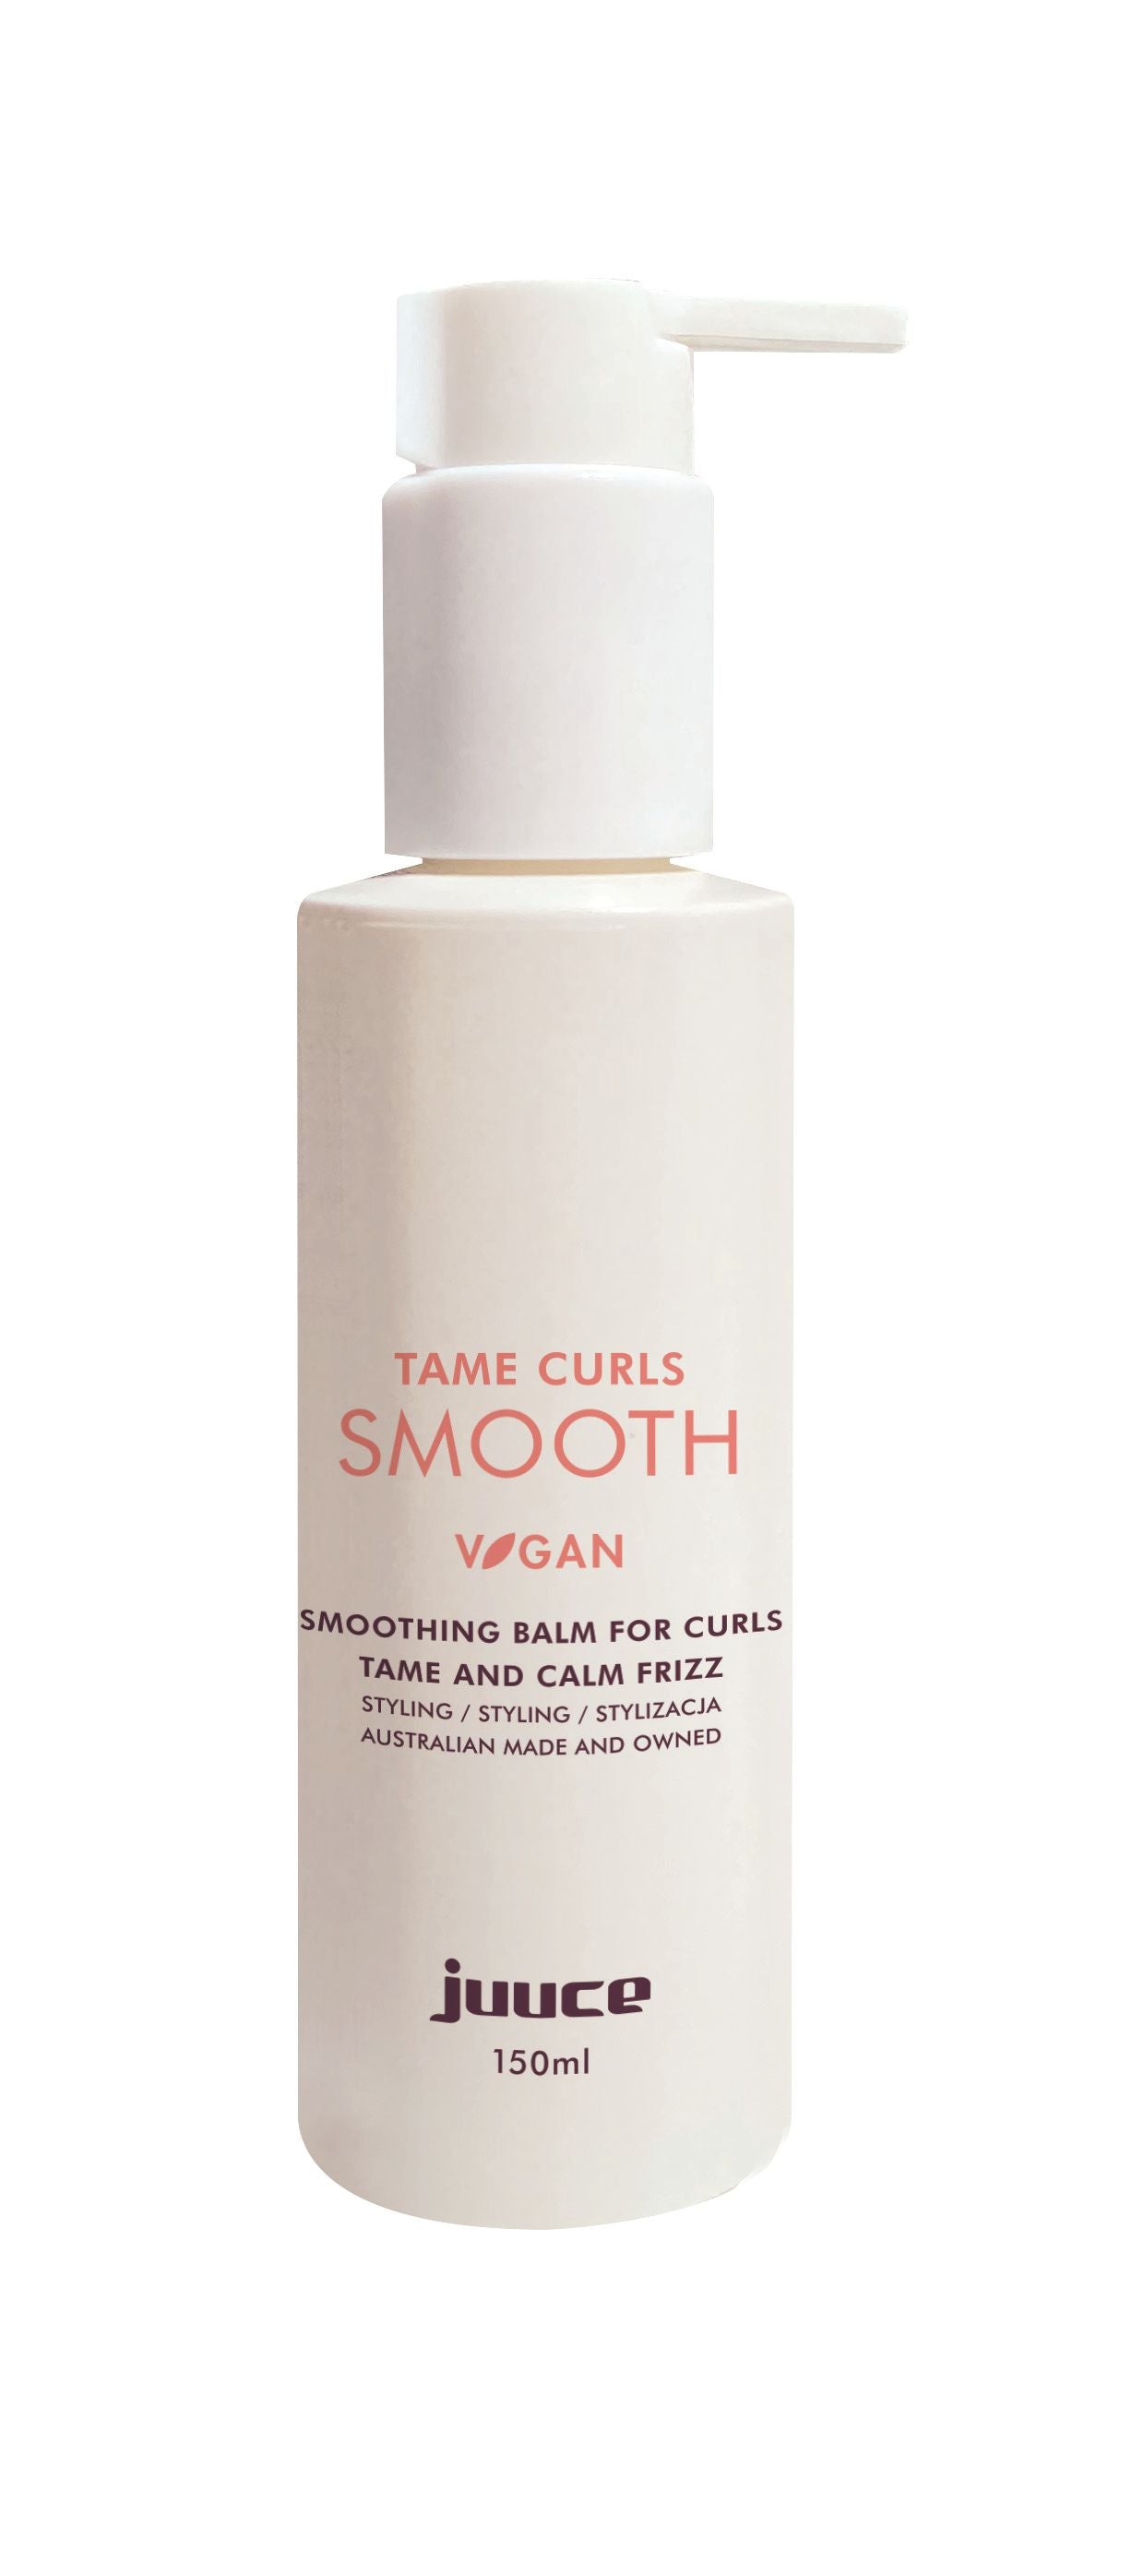 Juuce Tame Curls Smooth Smoothing Balm 150 ml Tame Curl Shine calm frizz Juuce Styling - On Line Hair Depot